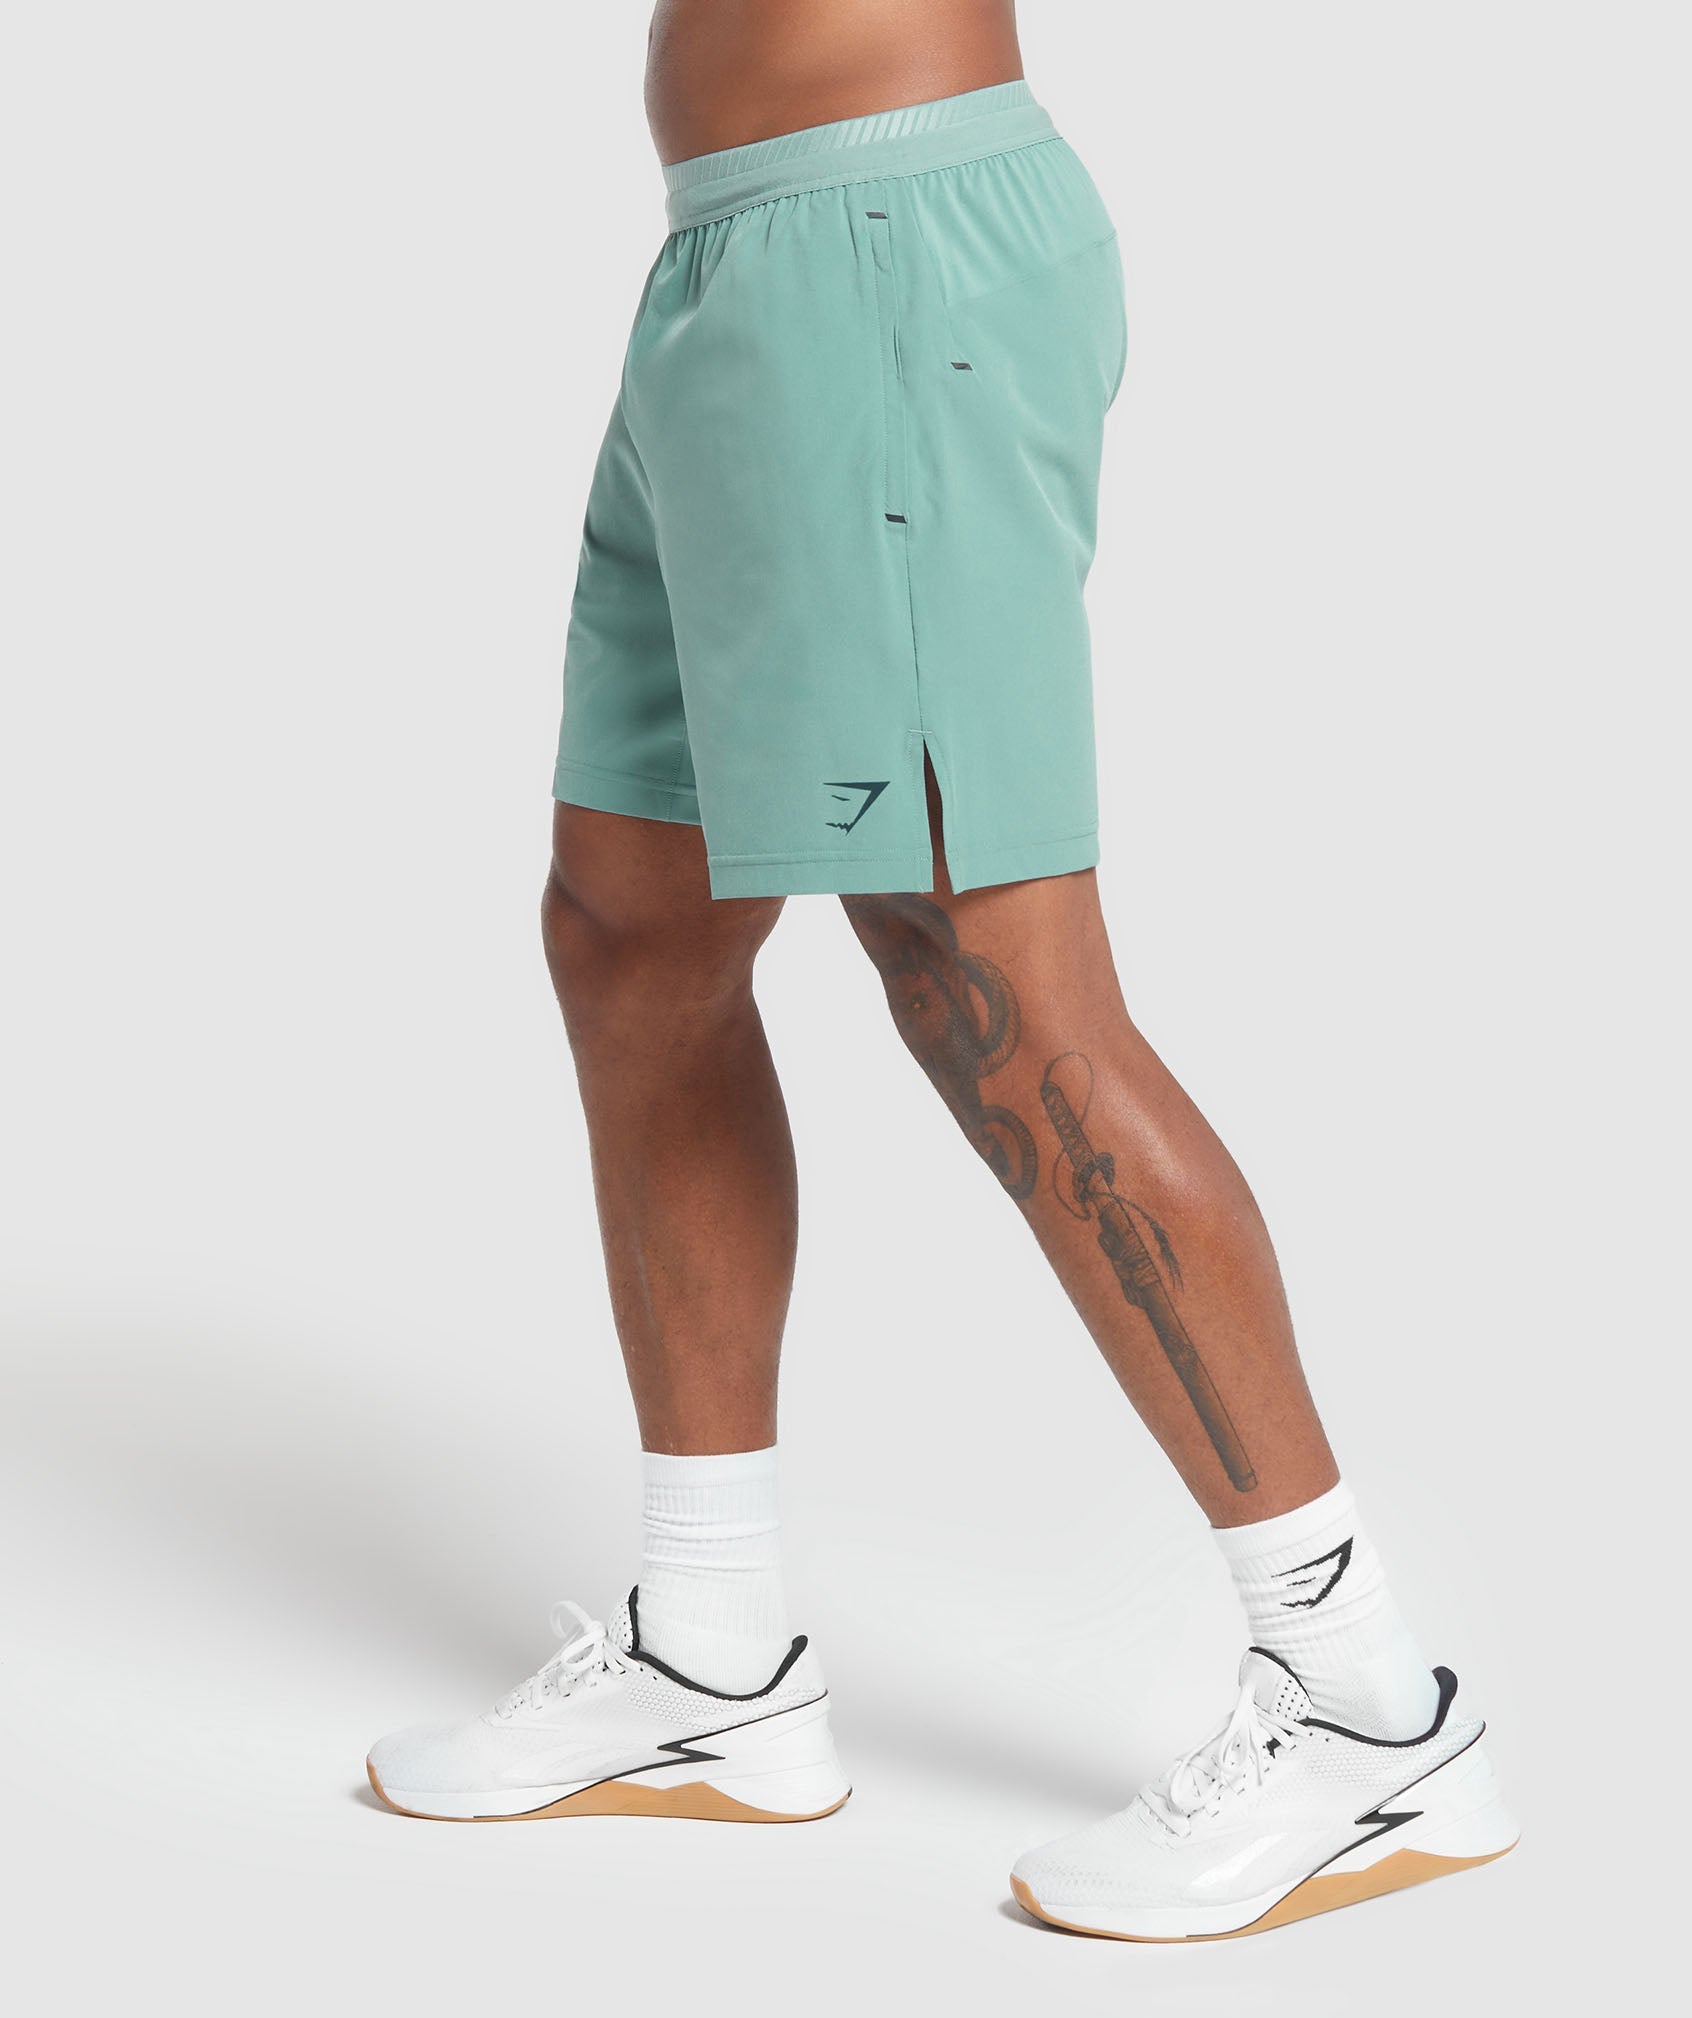 Apex 7" Hybrid Shorts in Duck Egg Blue - view 3